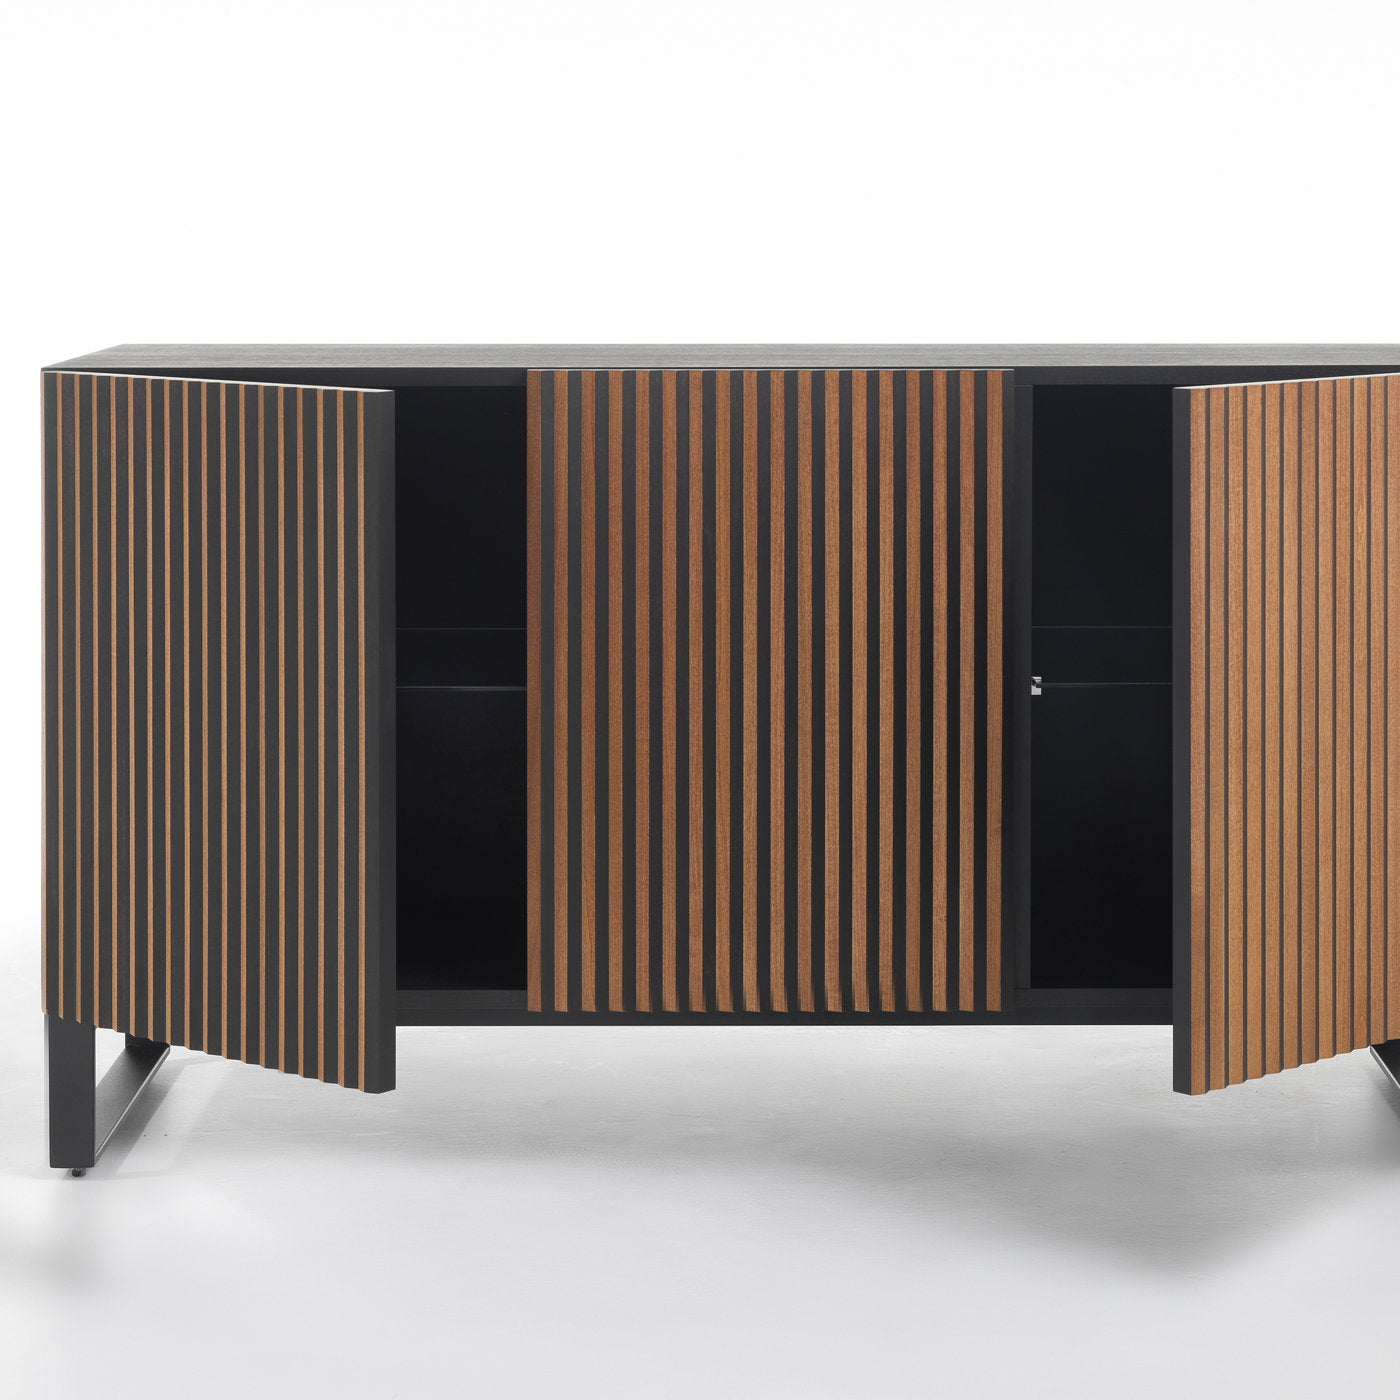 Leon On The Base Sideboard by StH - Alternative view 1